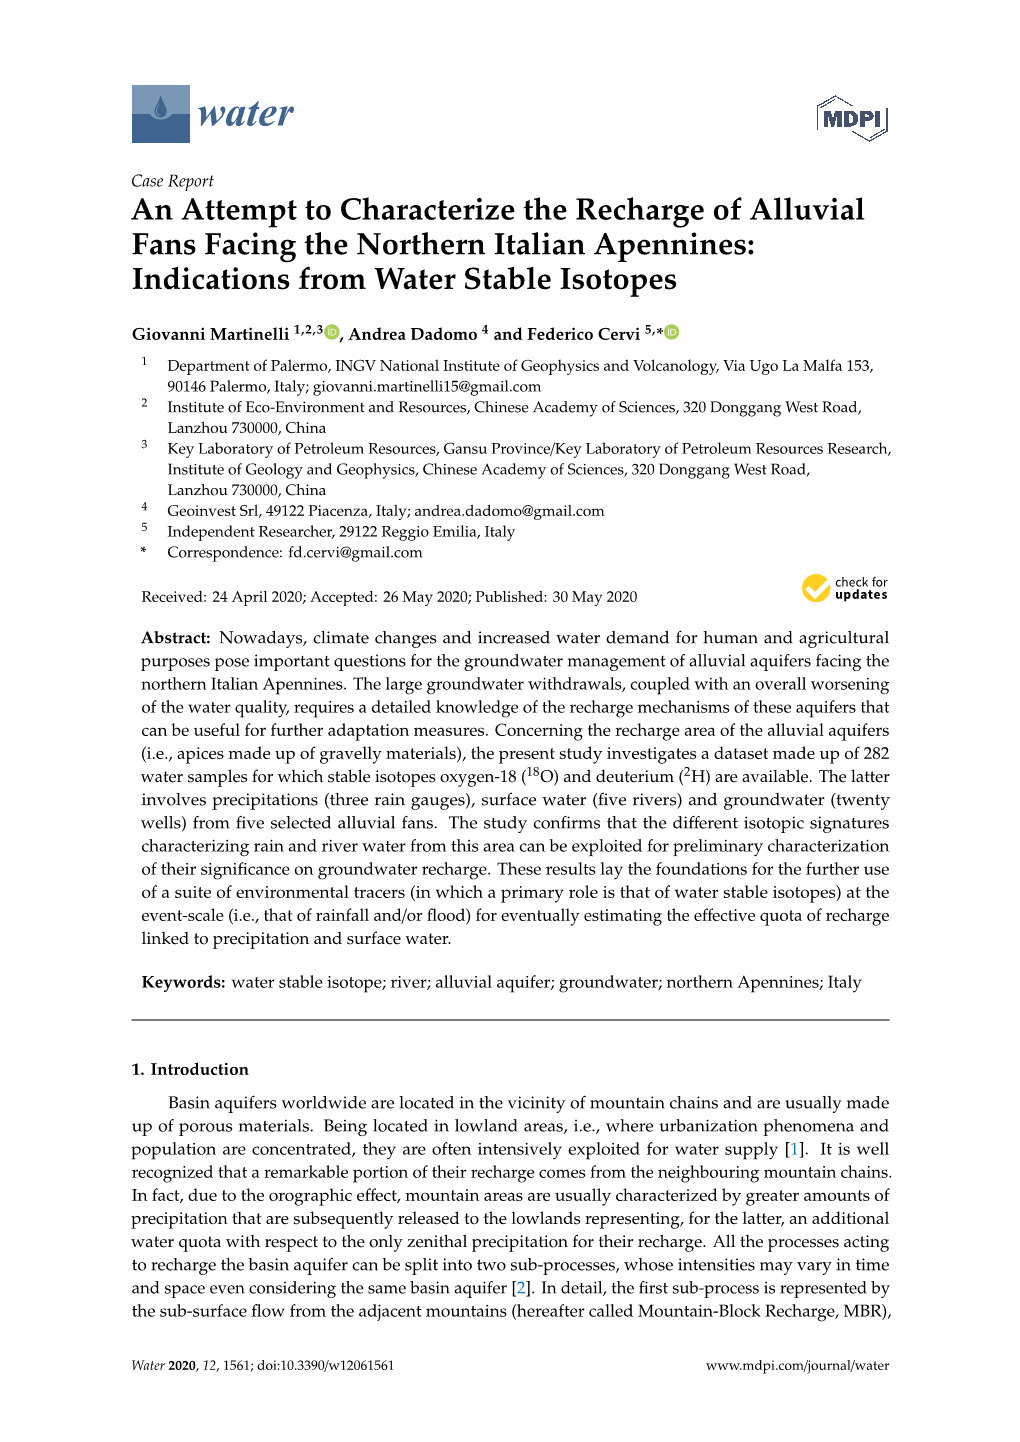 An Attempt to Characterize the Recharge of Alluvial Fans Facing the Northern Italian Apennines: Indications from Water Stable Isotopes